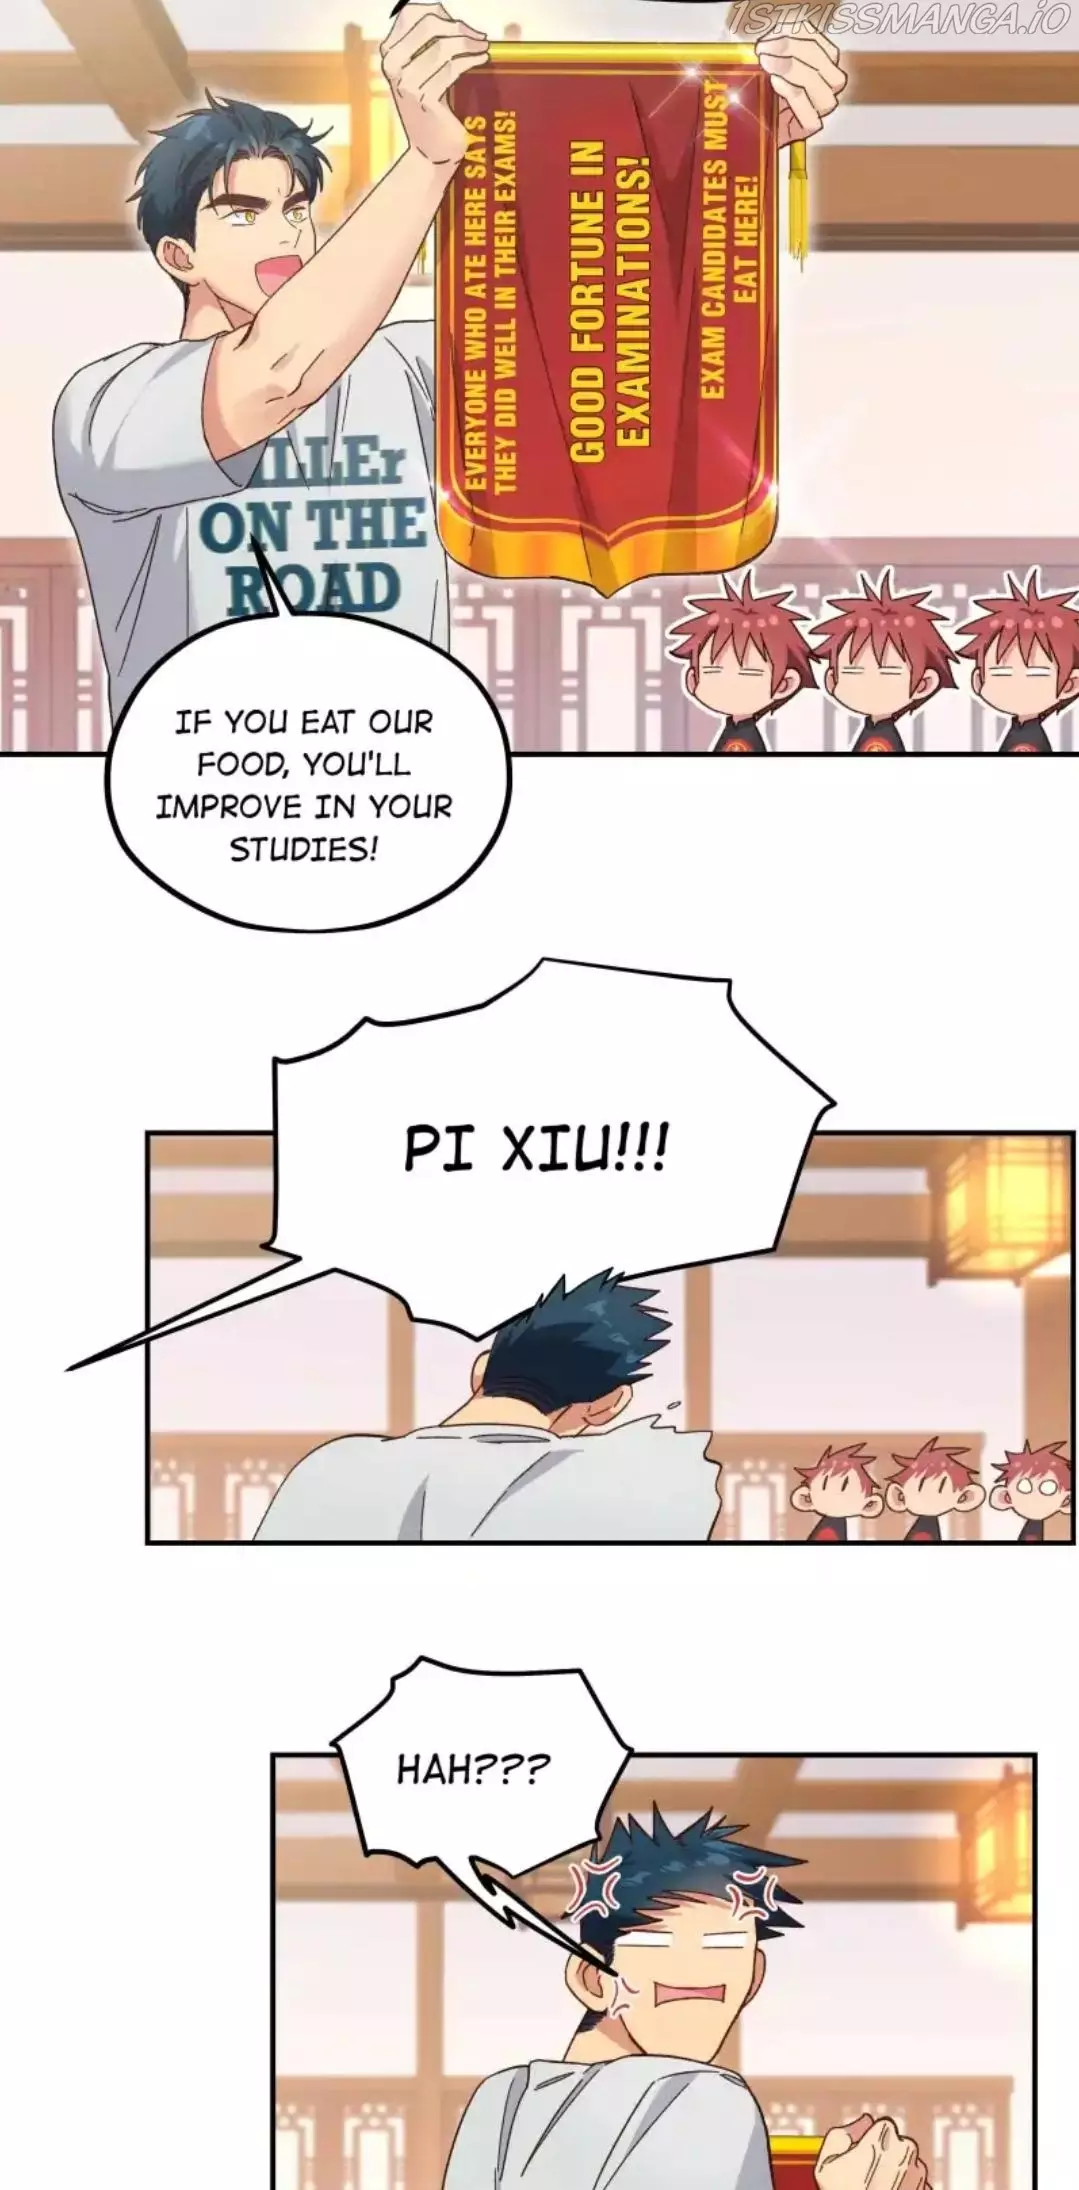 Pixiu's Eatery, No Way Out - 93 page 35-4a330ed3